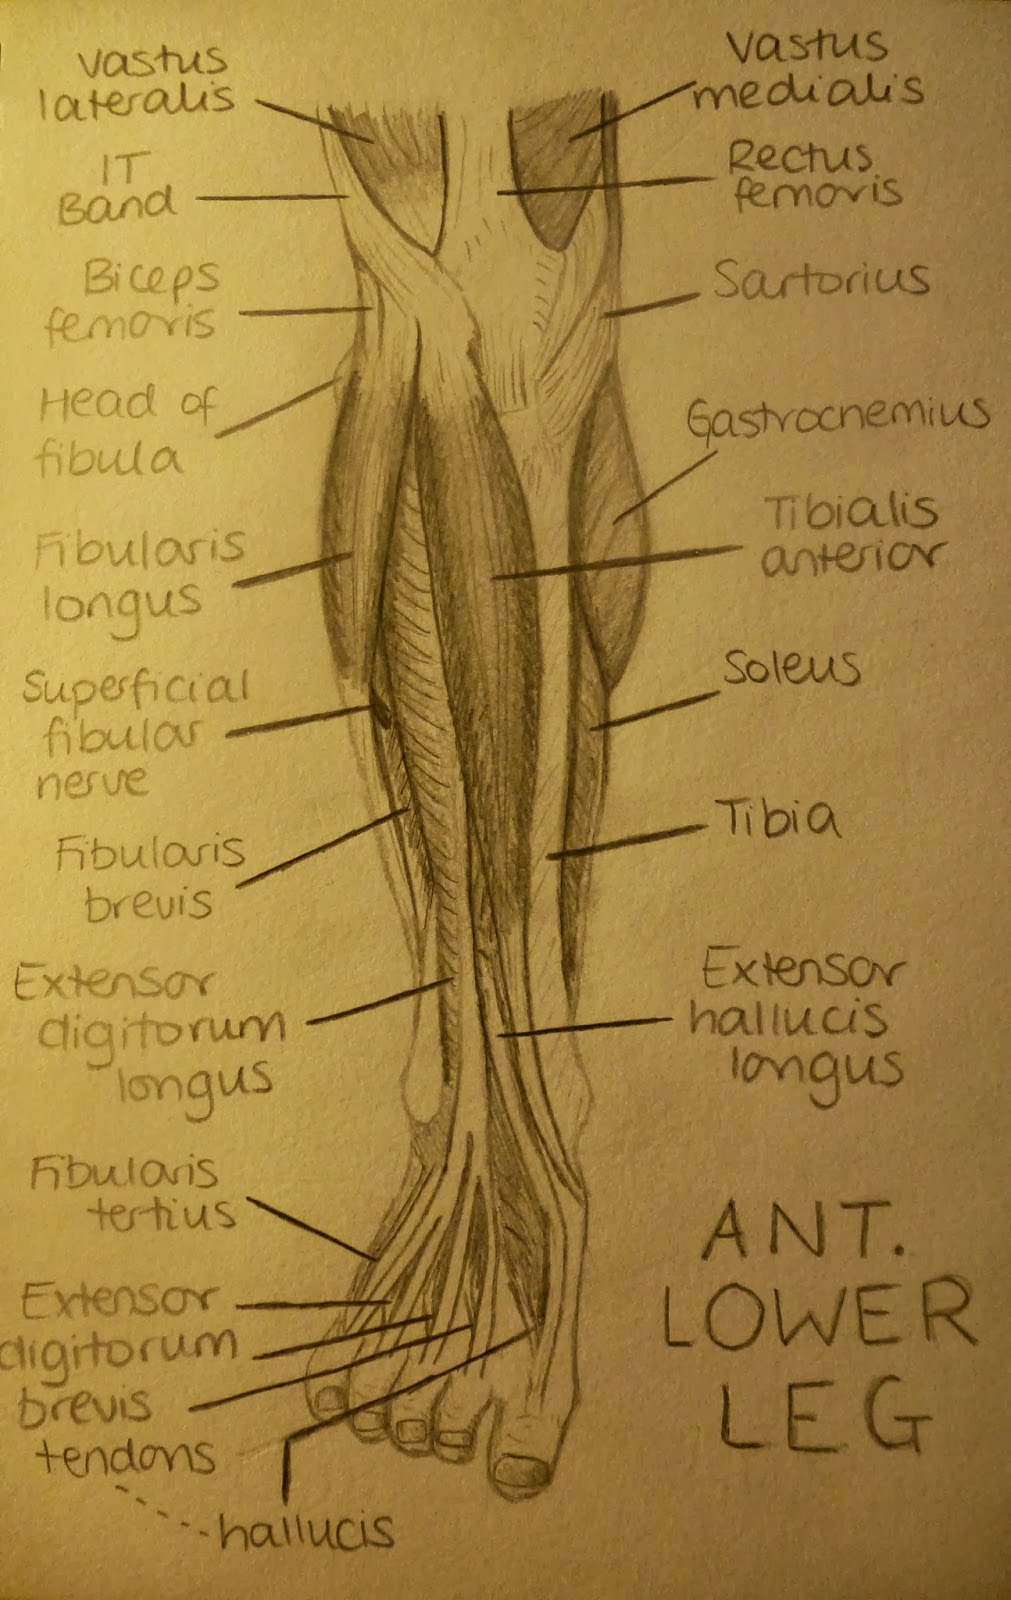 Physiotherapy Revision: Anatomy